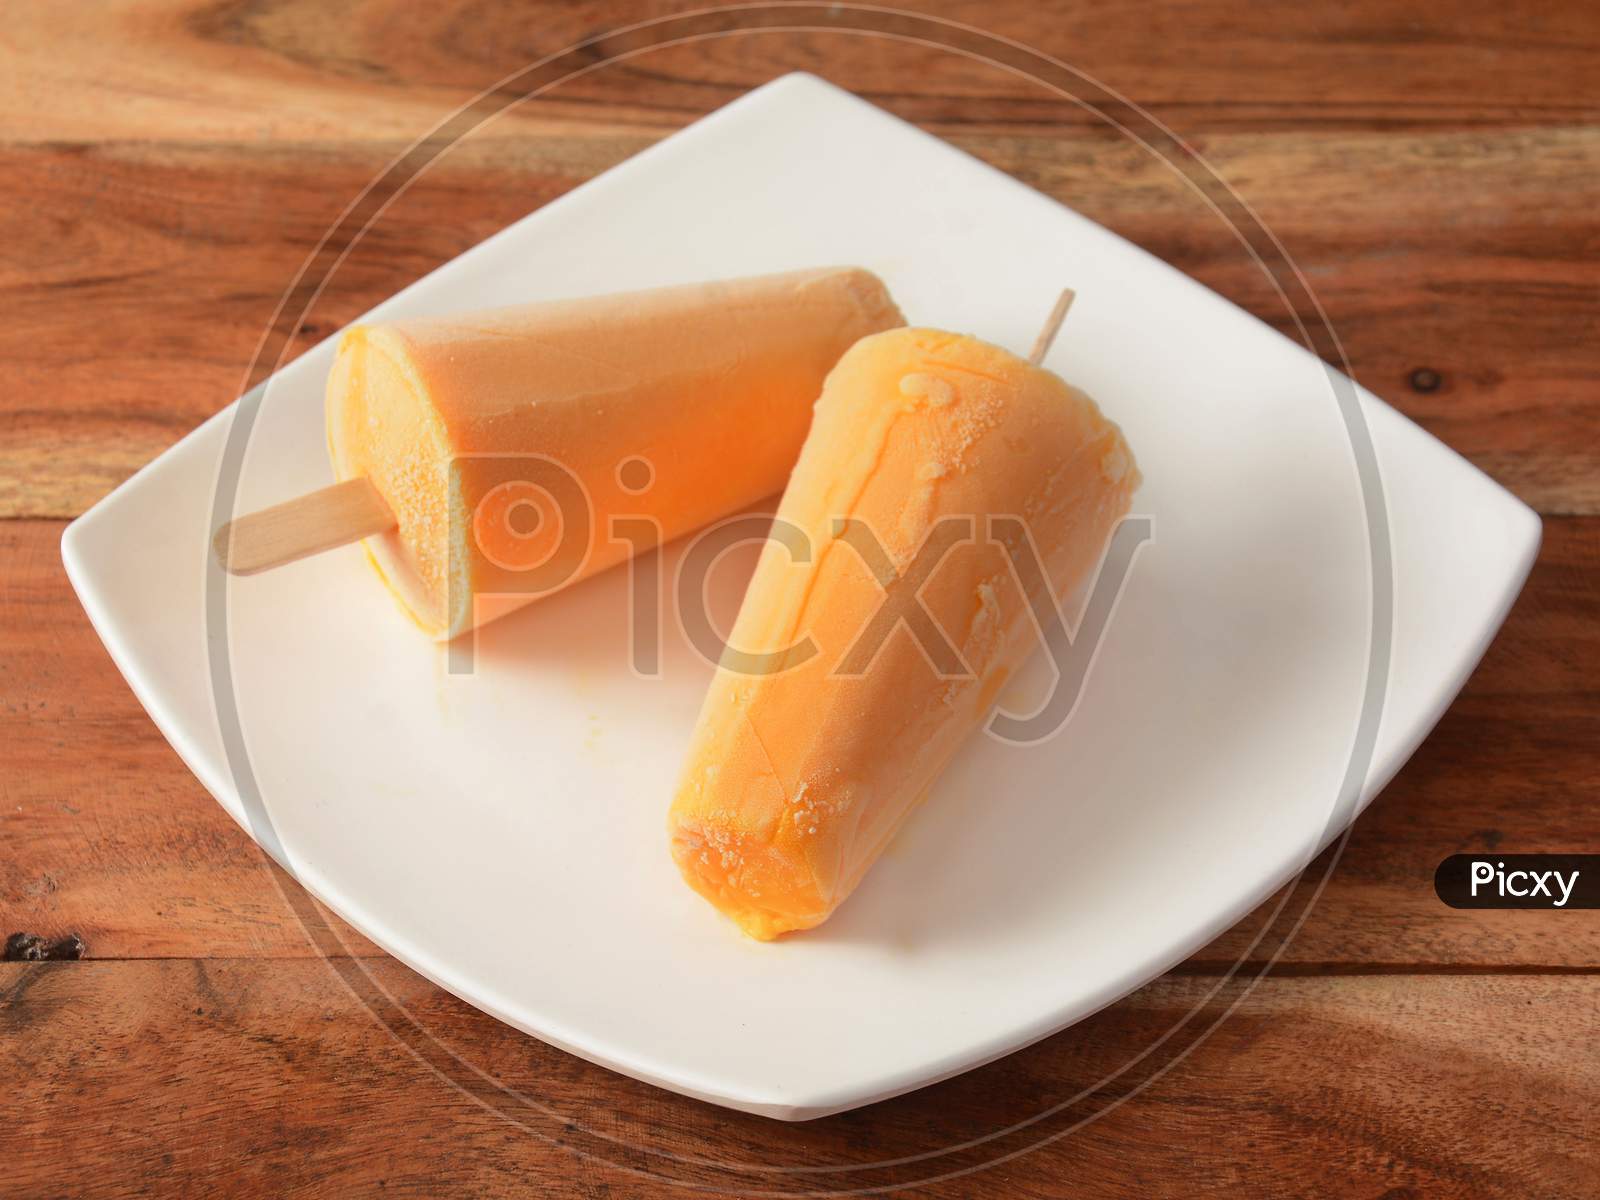 Kesar Kulfi Served In White Plate Over A Rustic Wooden Background, Selective Focus